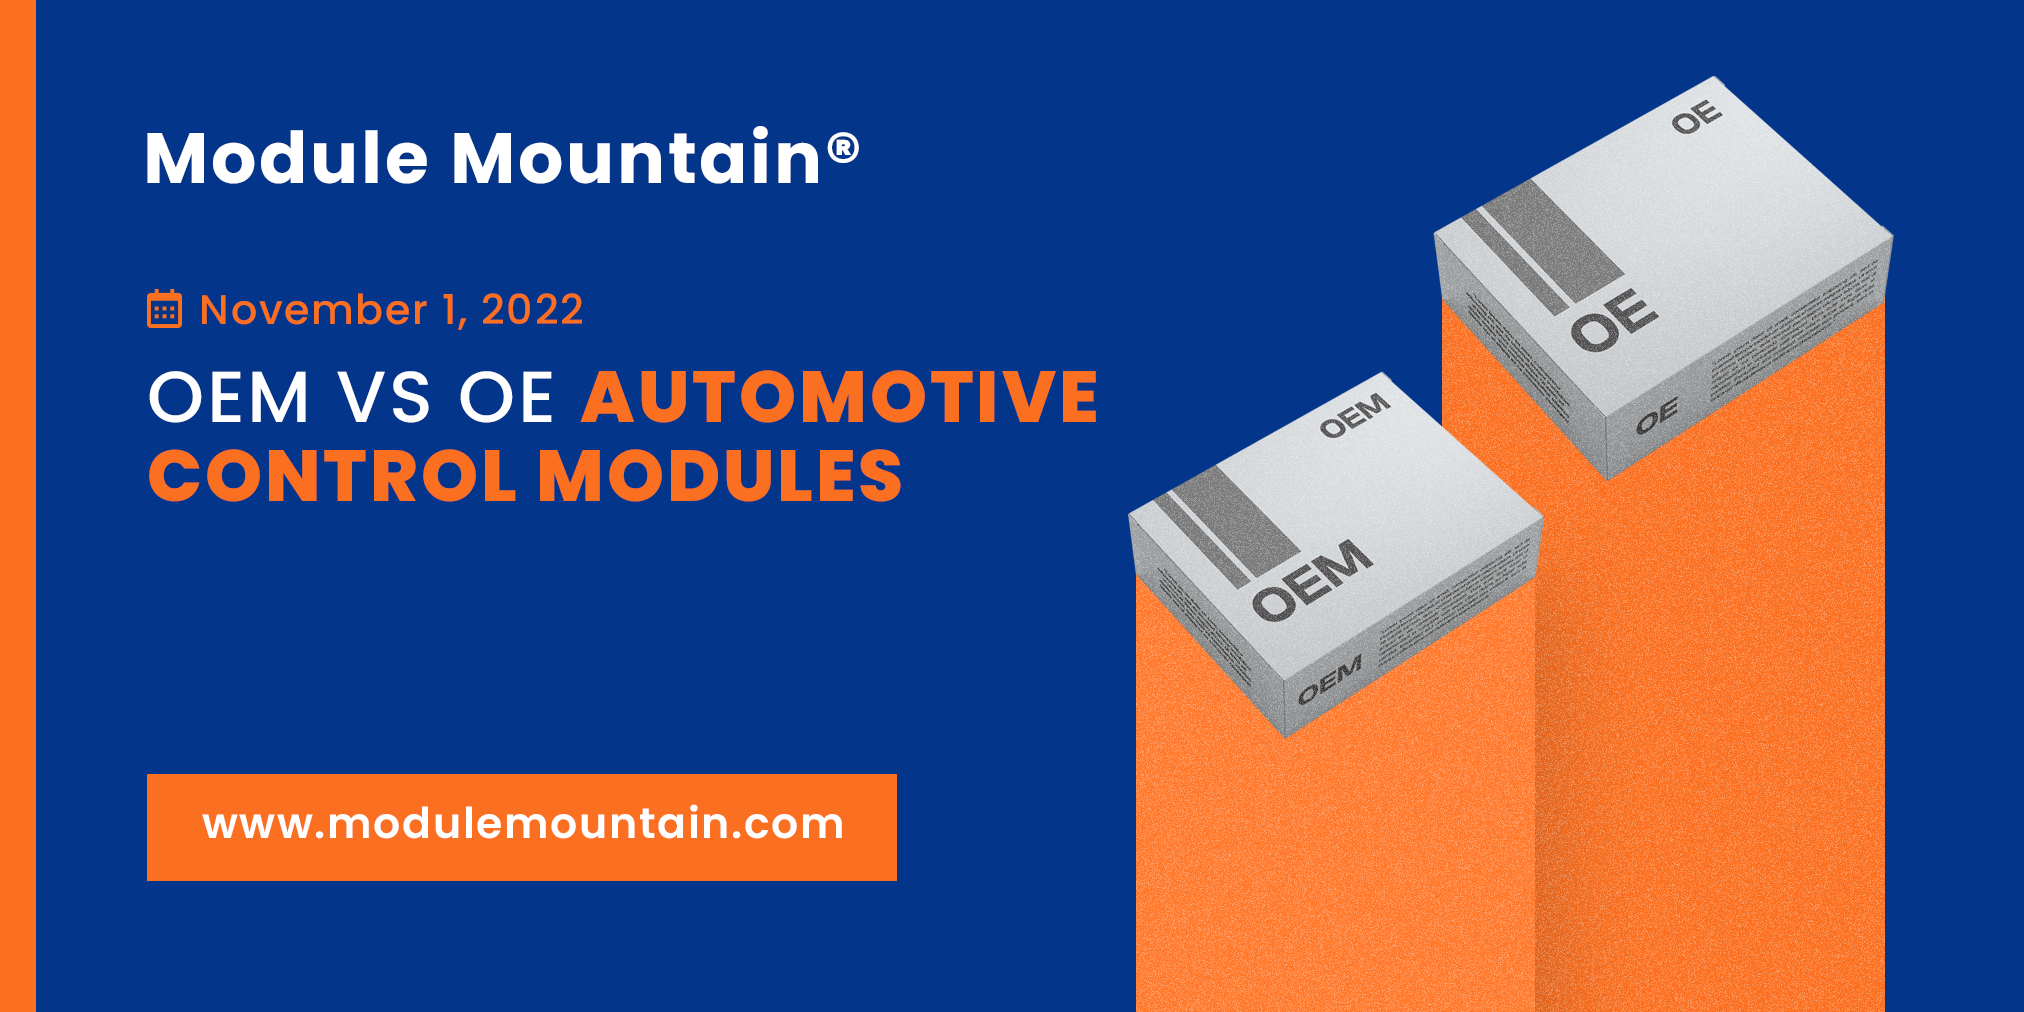 OEM vs. OE Automotive Control Modules: Which Is Better?